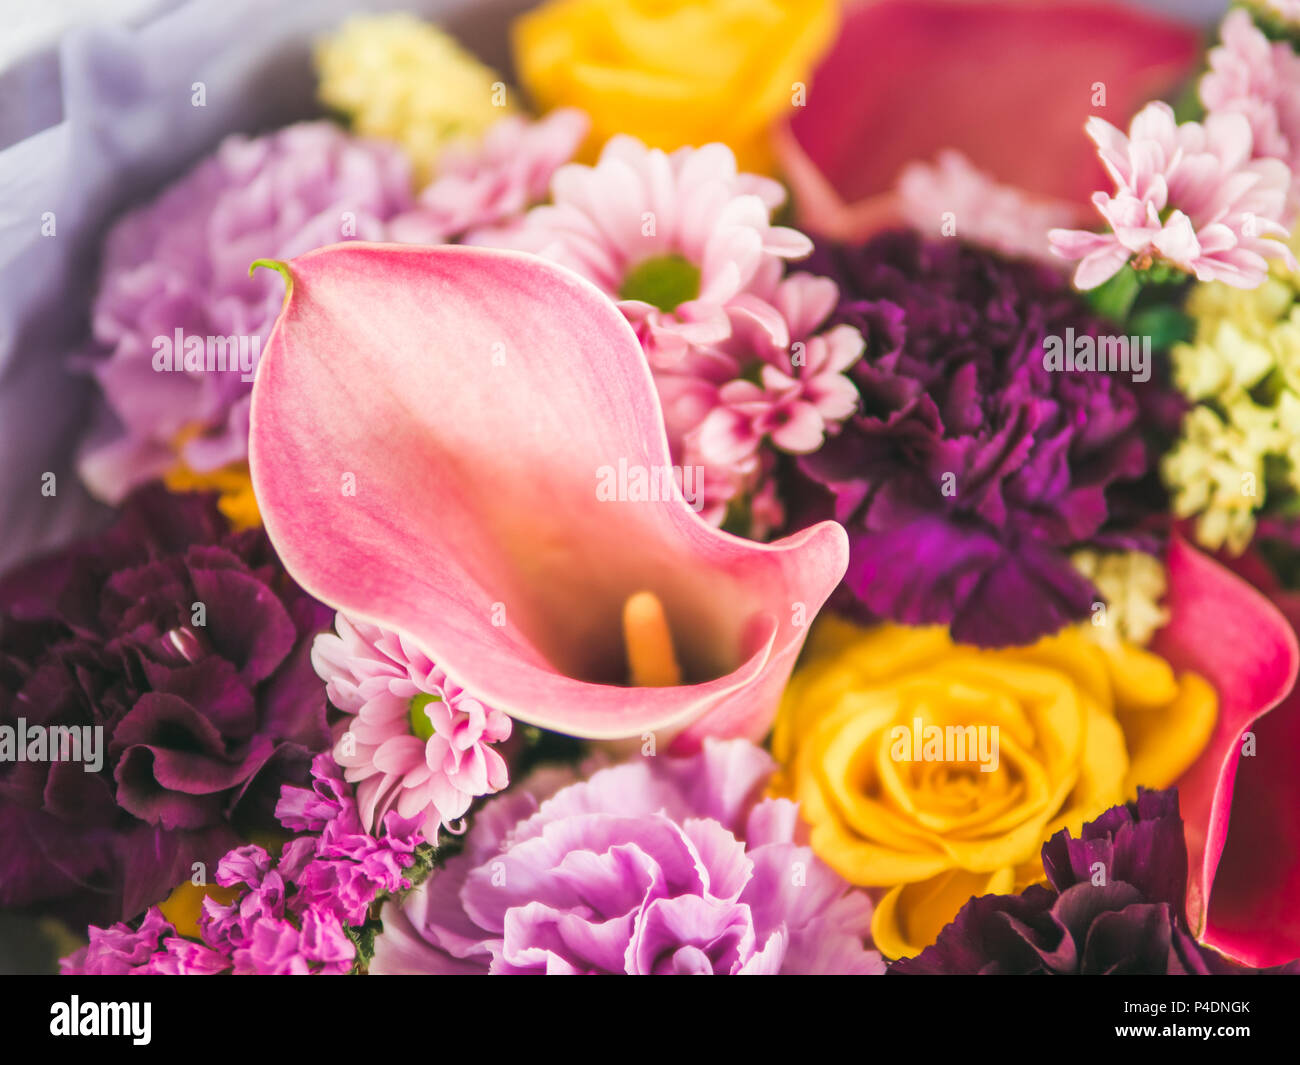 Extreme close up lilac bouquet with arum lily or calla, roses, dianthus, chrysanthemum, limonium, matthiola. Focus on calla. Shallow DOF, copy space Stock Photo